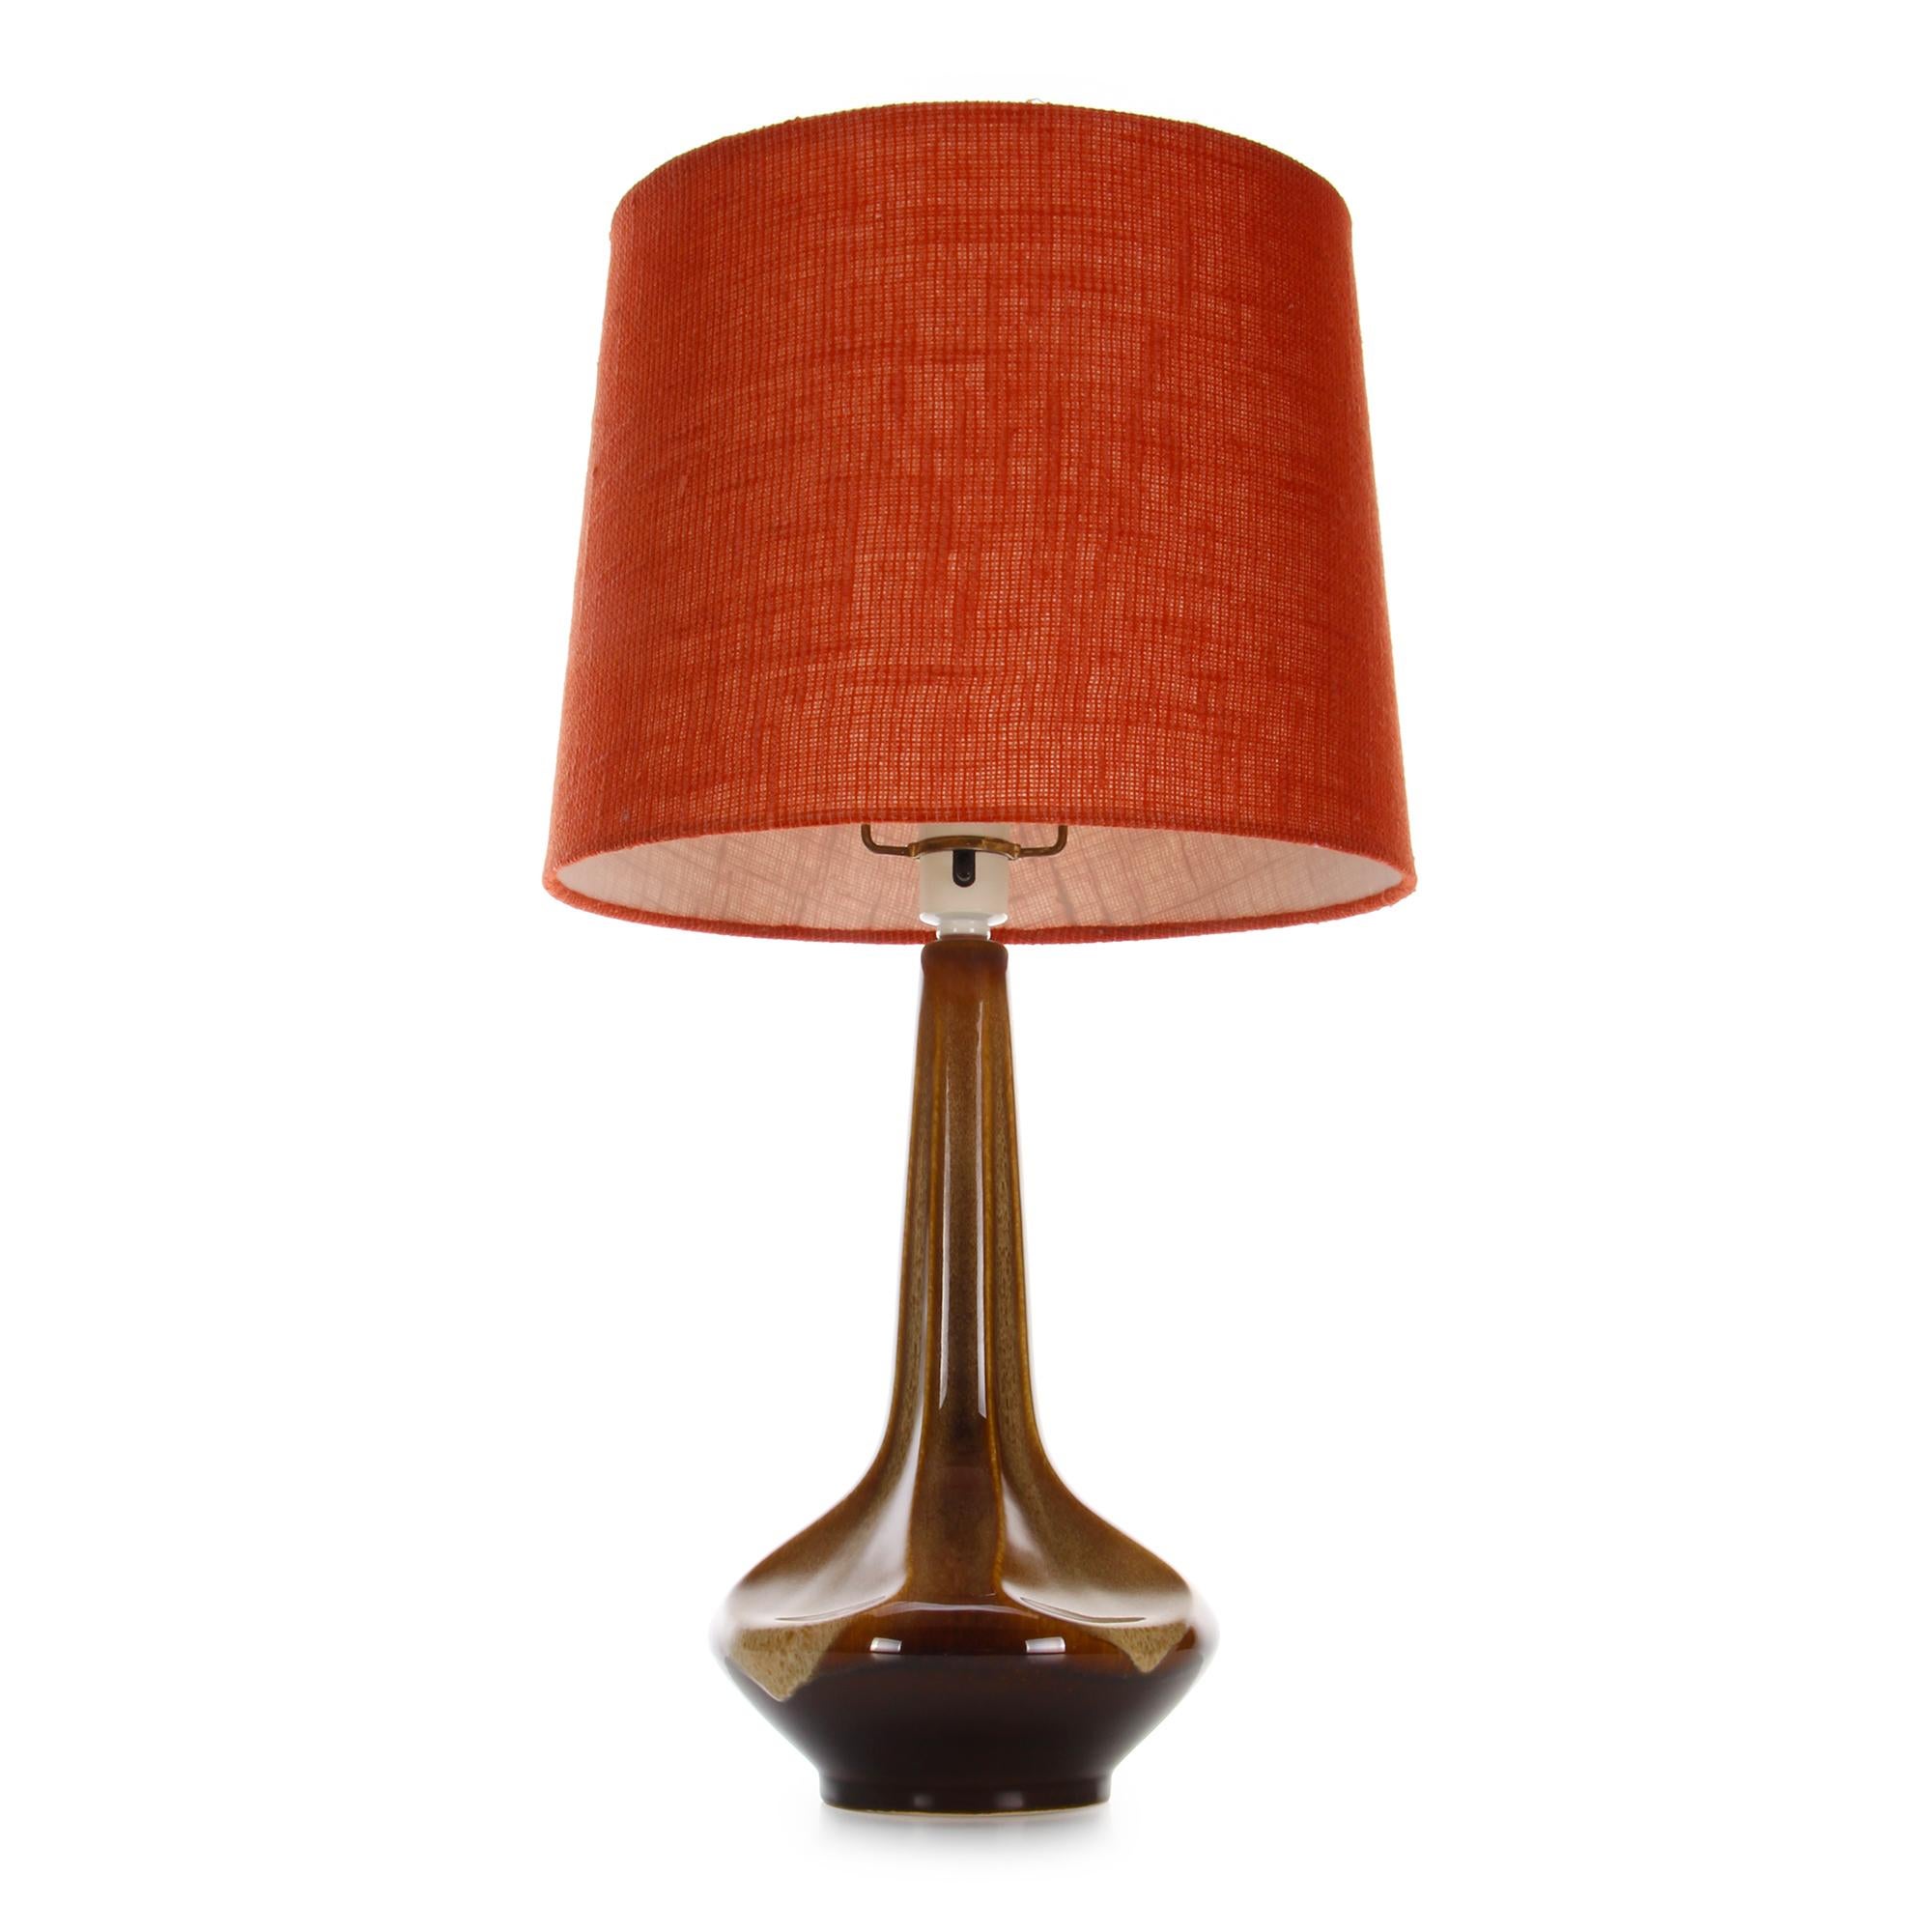 Scandinavian Modern Large Brown Table Lamp by Einar Johansen for Soholm 1960s, with Vintage Shade